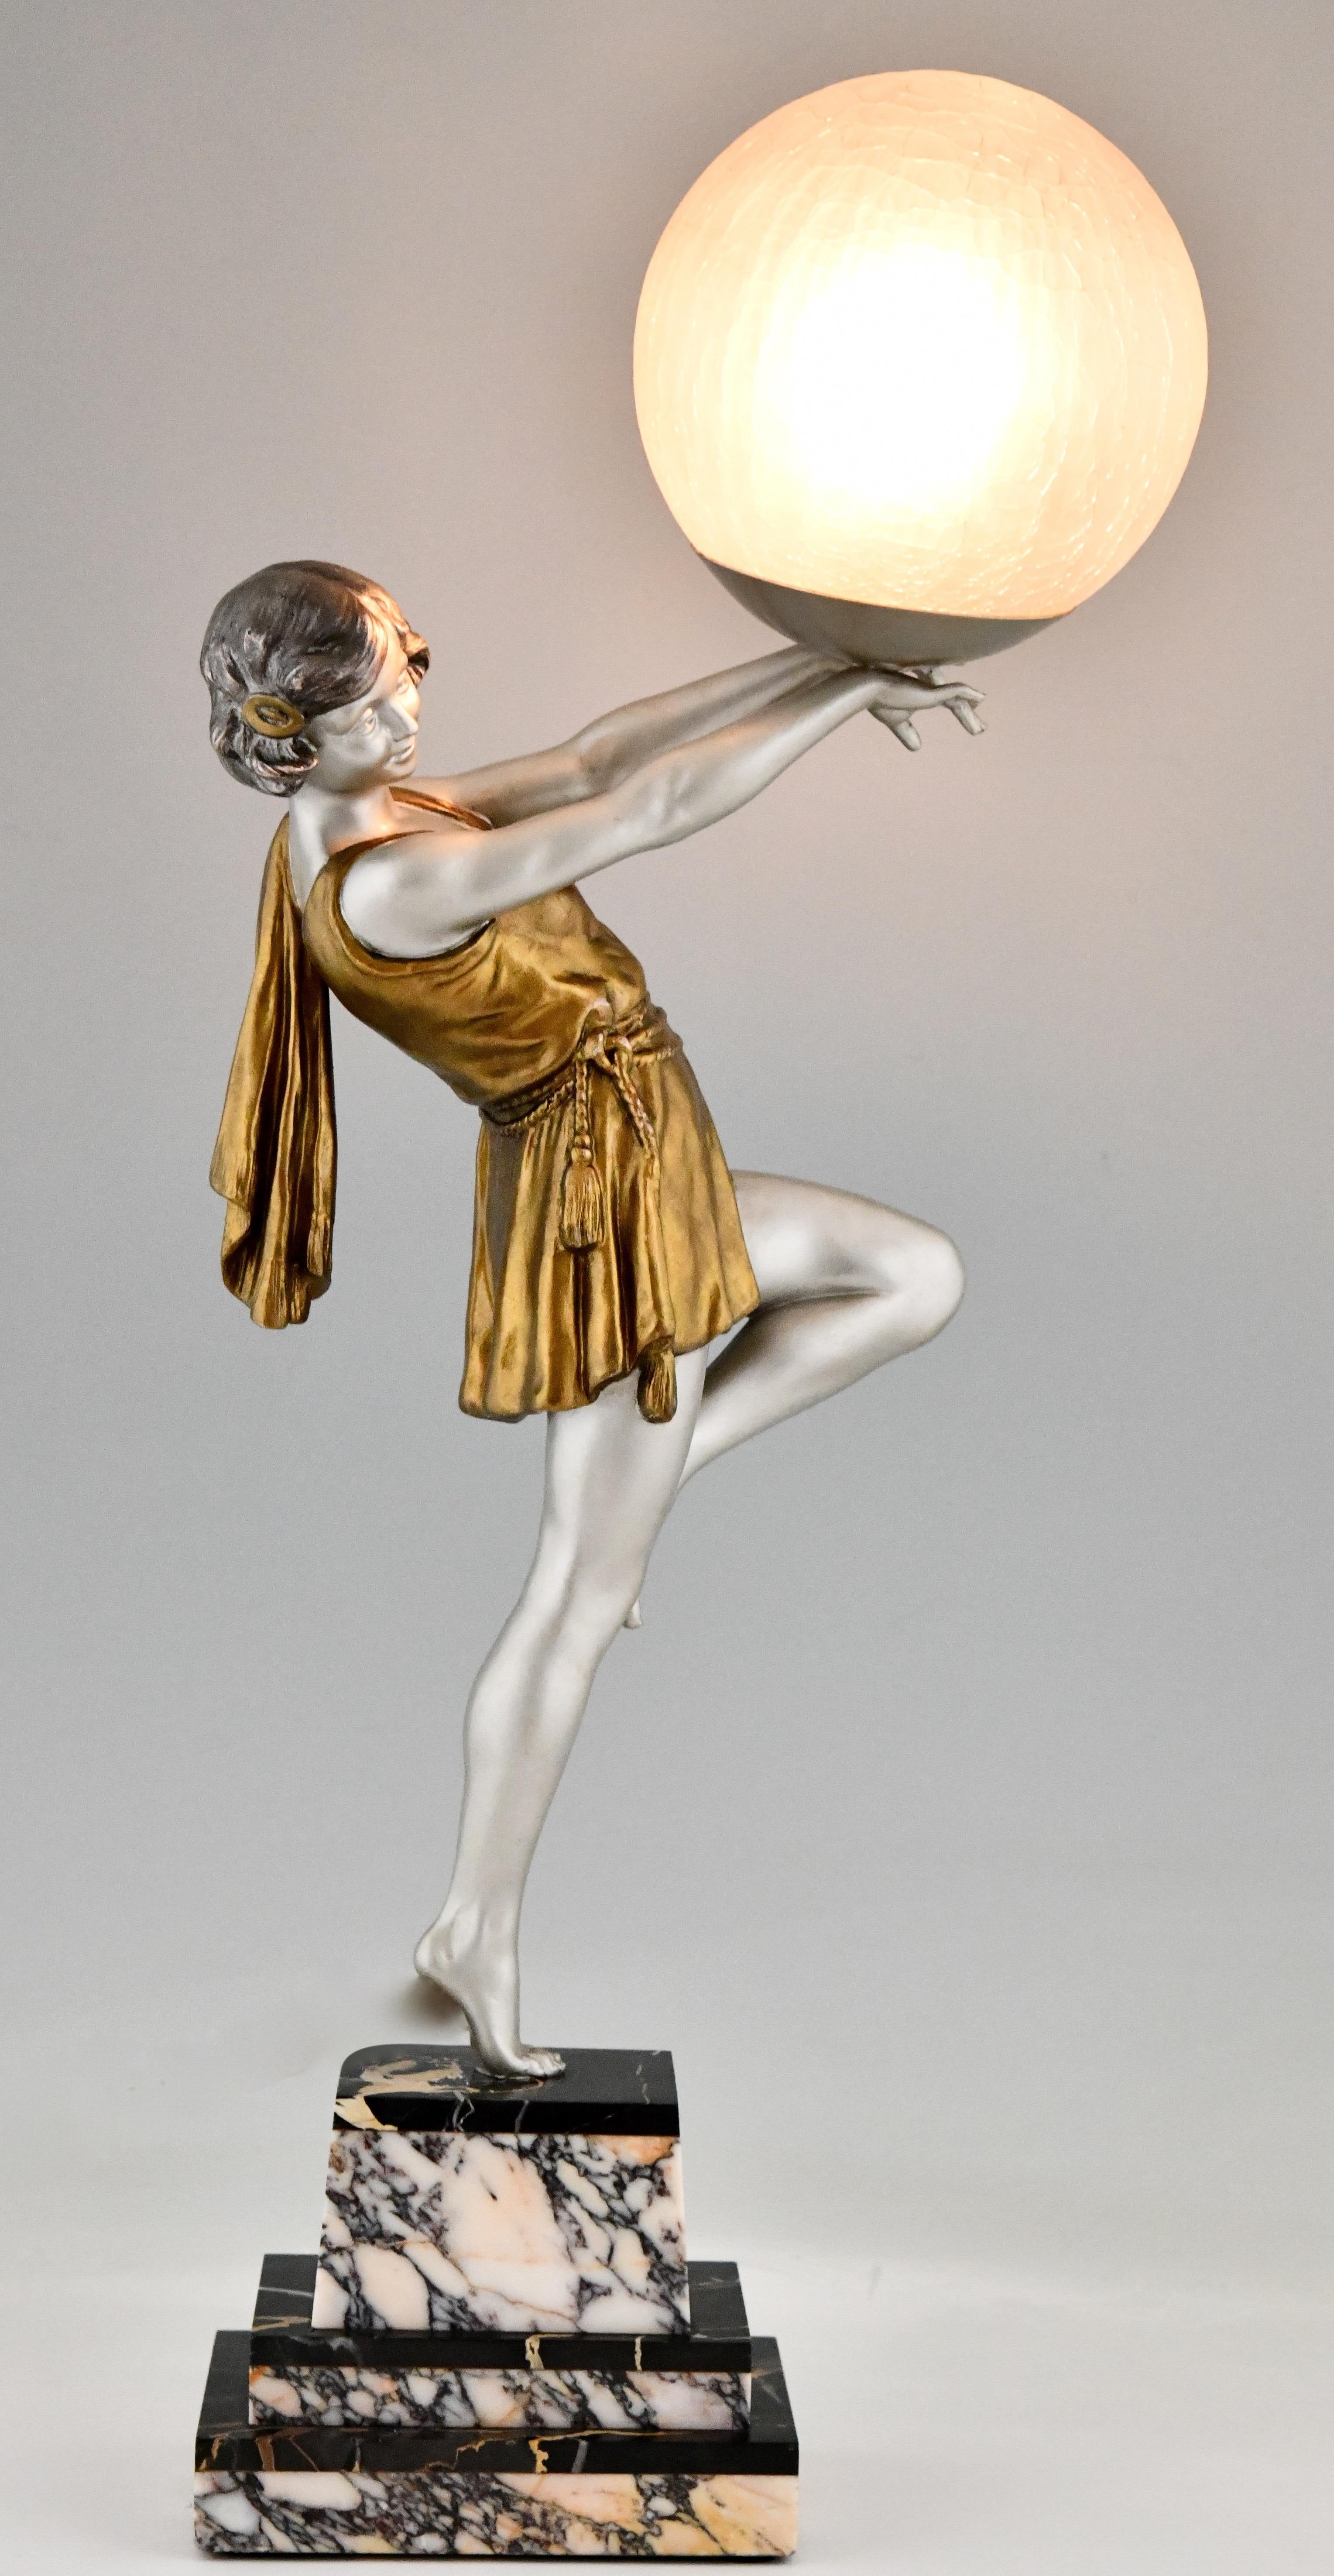 Art Deco sculptural lamp with lady holding a ball signed by the French artist Emile Carlier on a fine marble base, circa 1930.

This model (as sculpture) is illustrated on page 440 of the book?Bronzes, sculptors and founders by H. Berman,